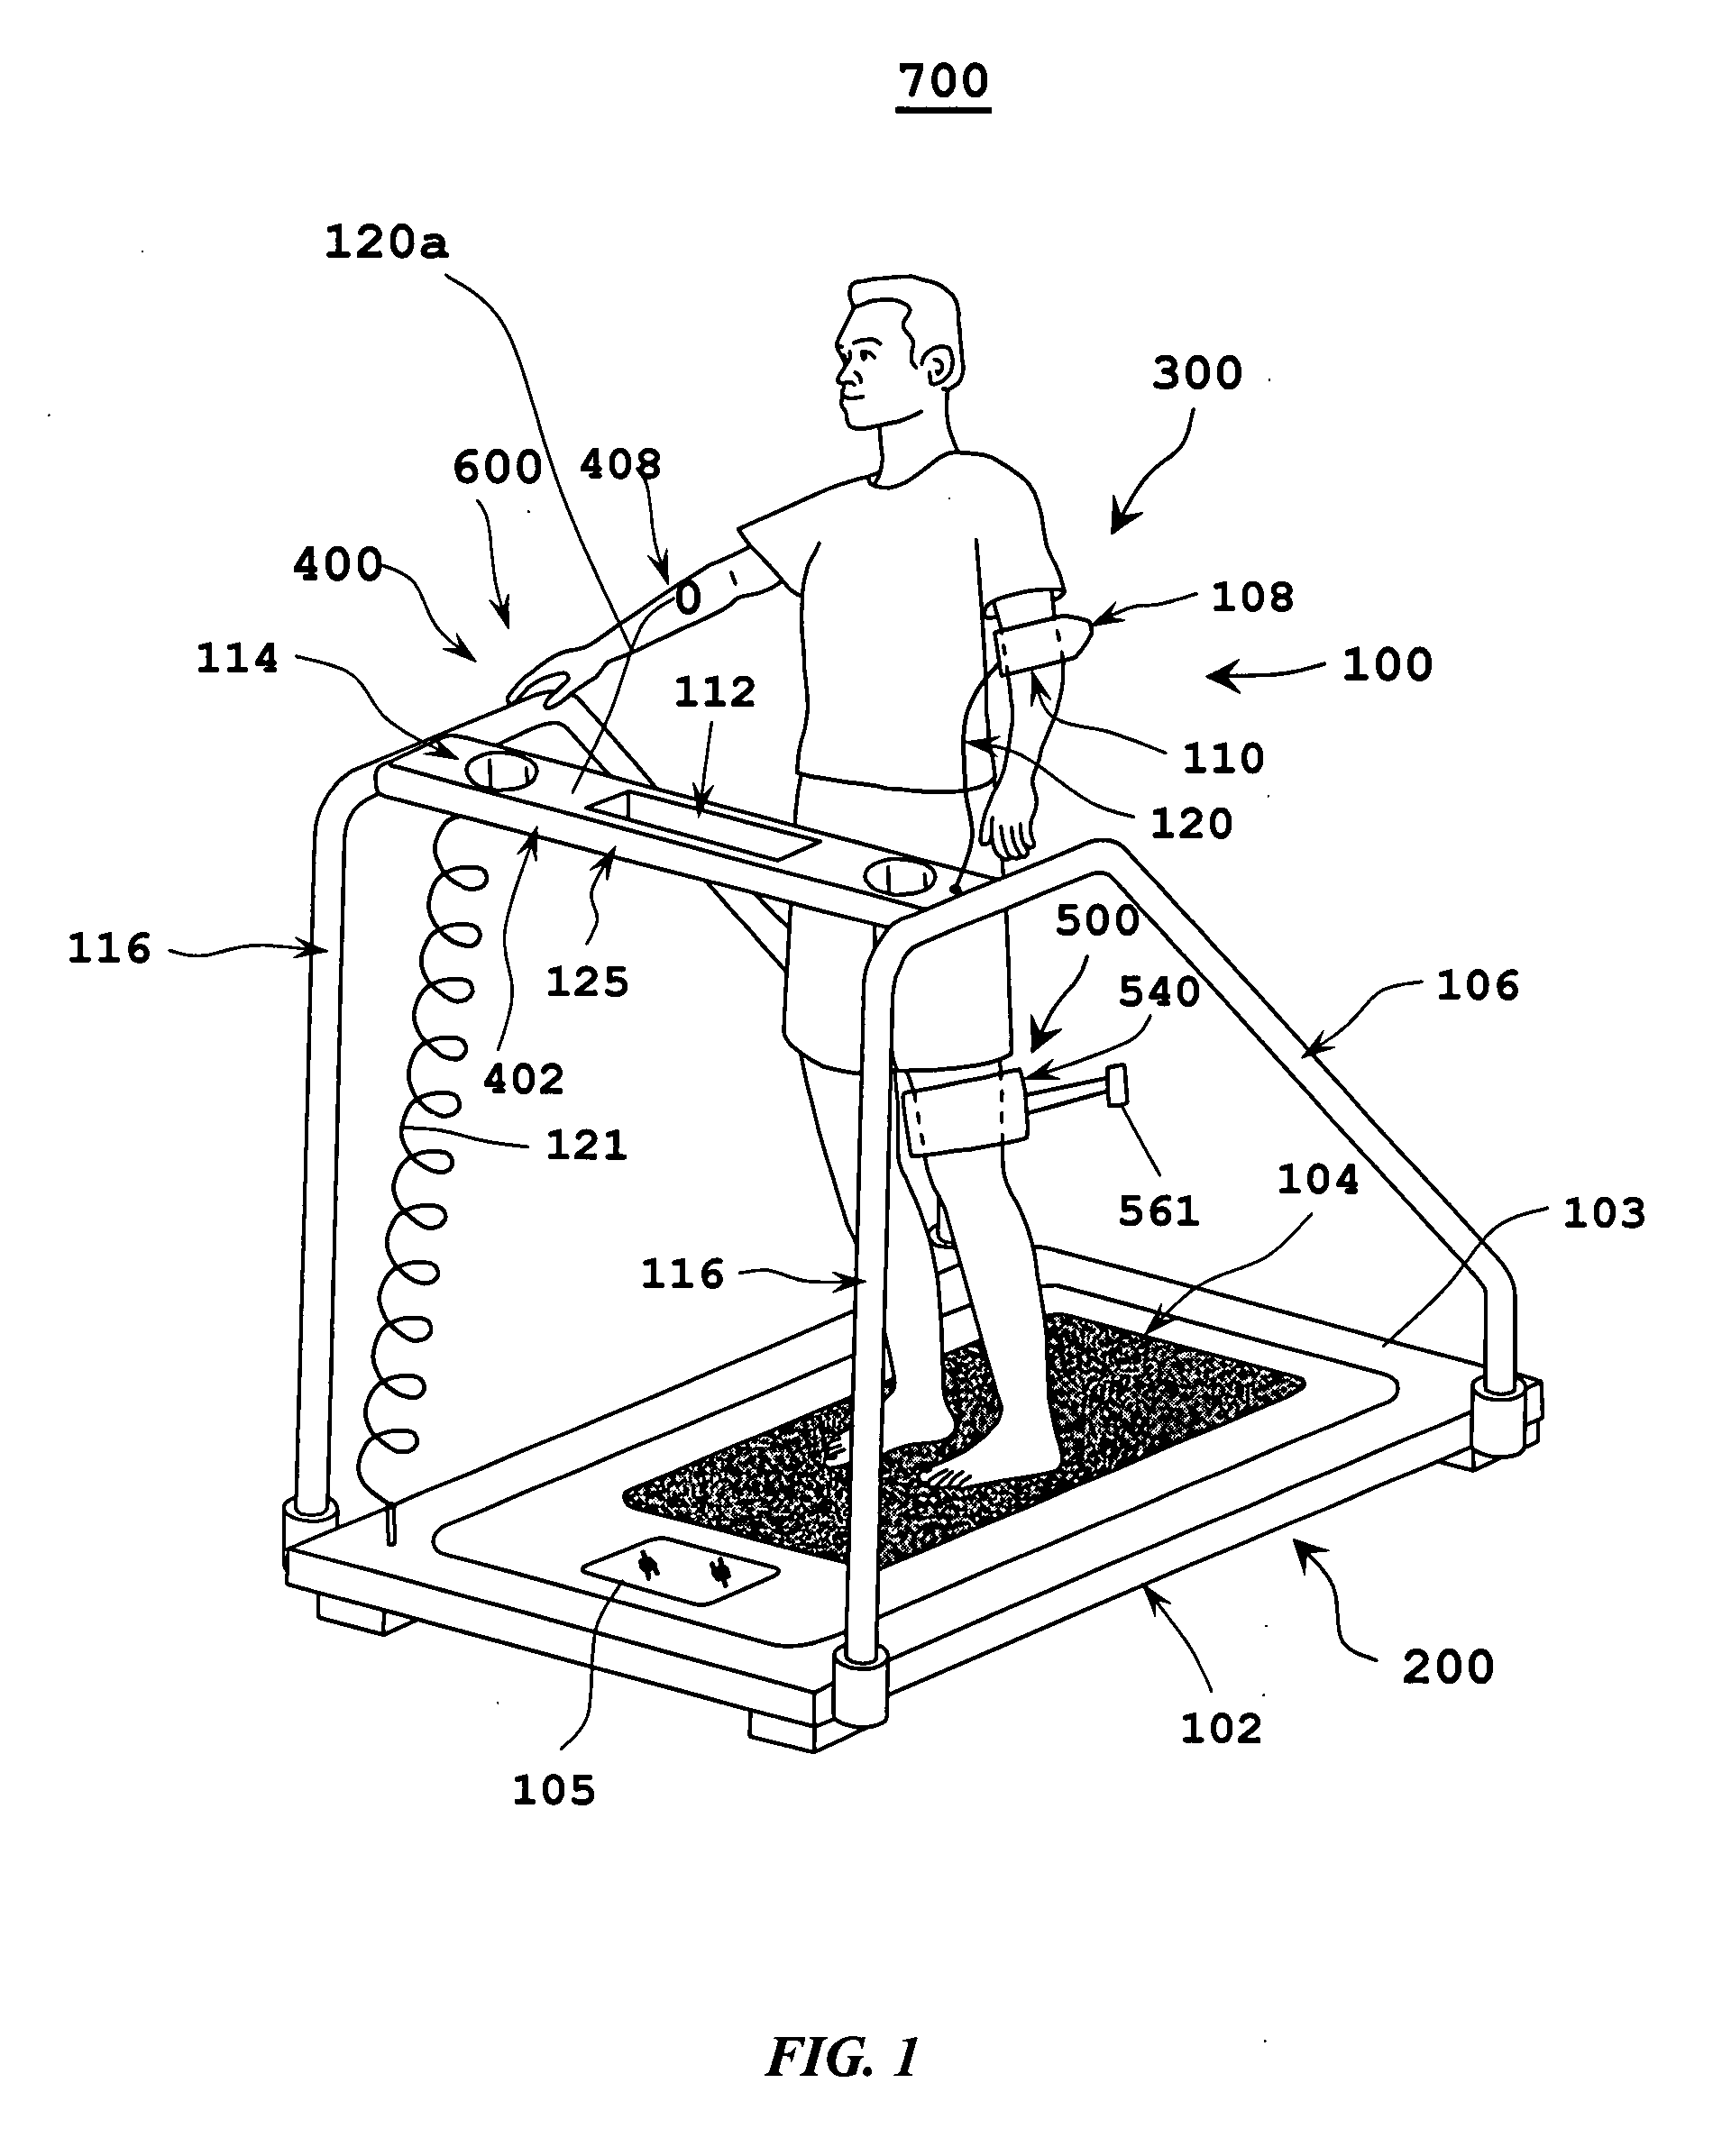 System and method for providing therapeutic treatment using a combination of ultrasound, electro-stimulation and vibrational stimulation